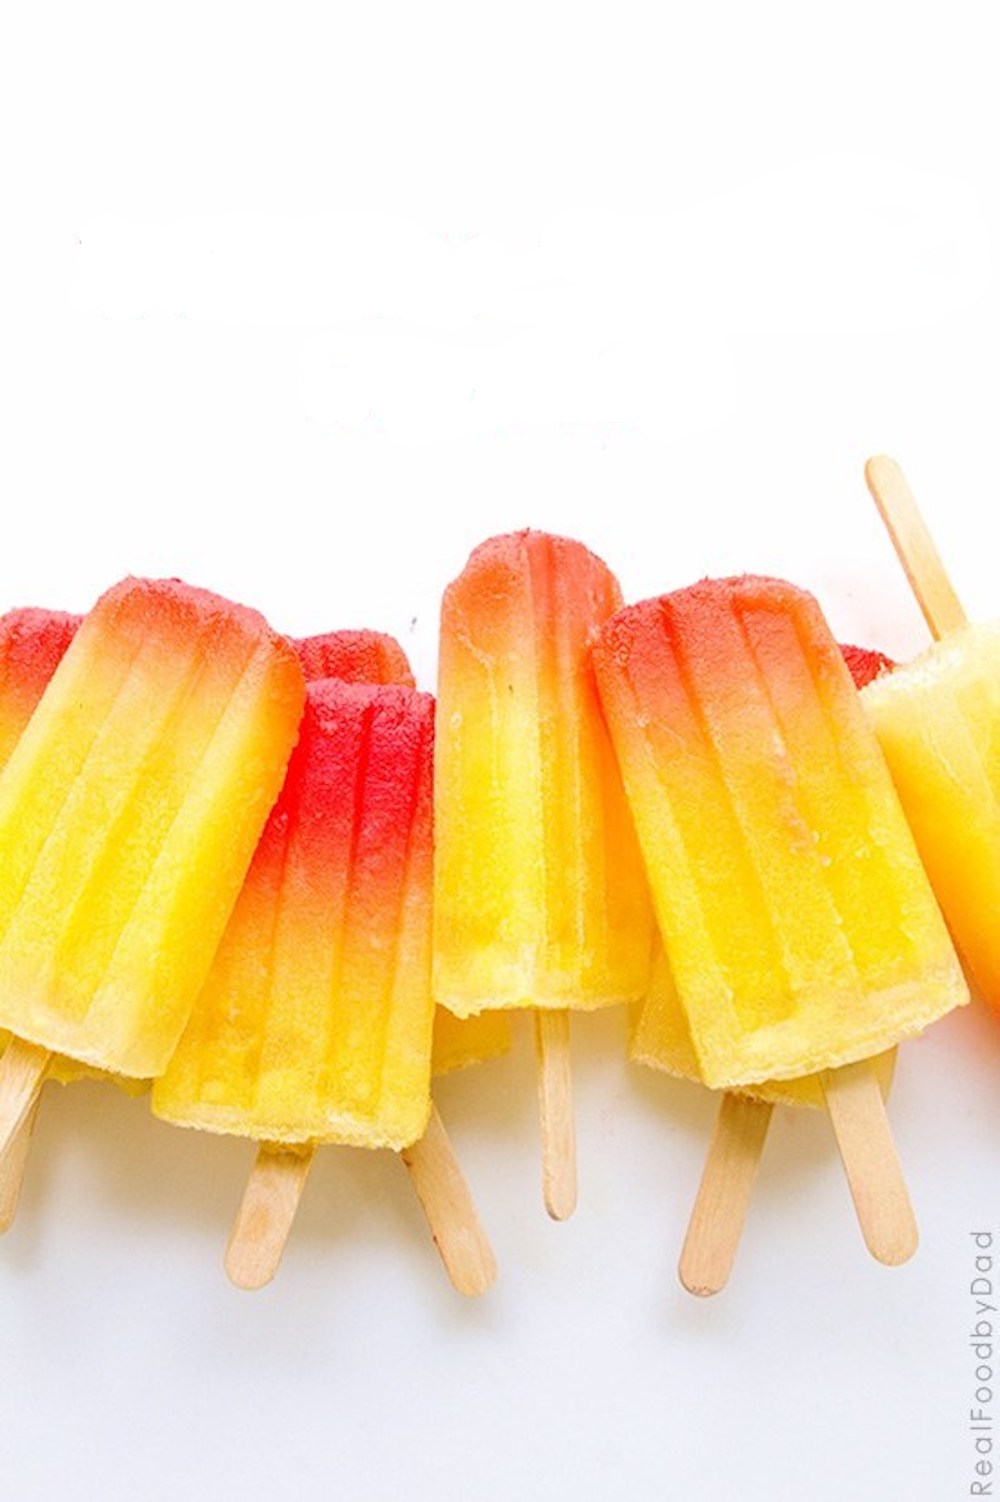 boozy popsicles, tropical tequila sunrise popsicles